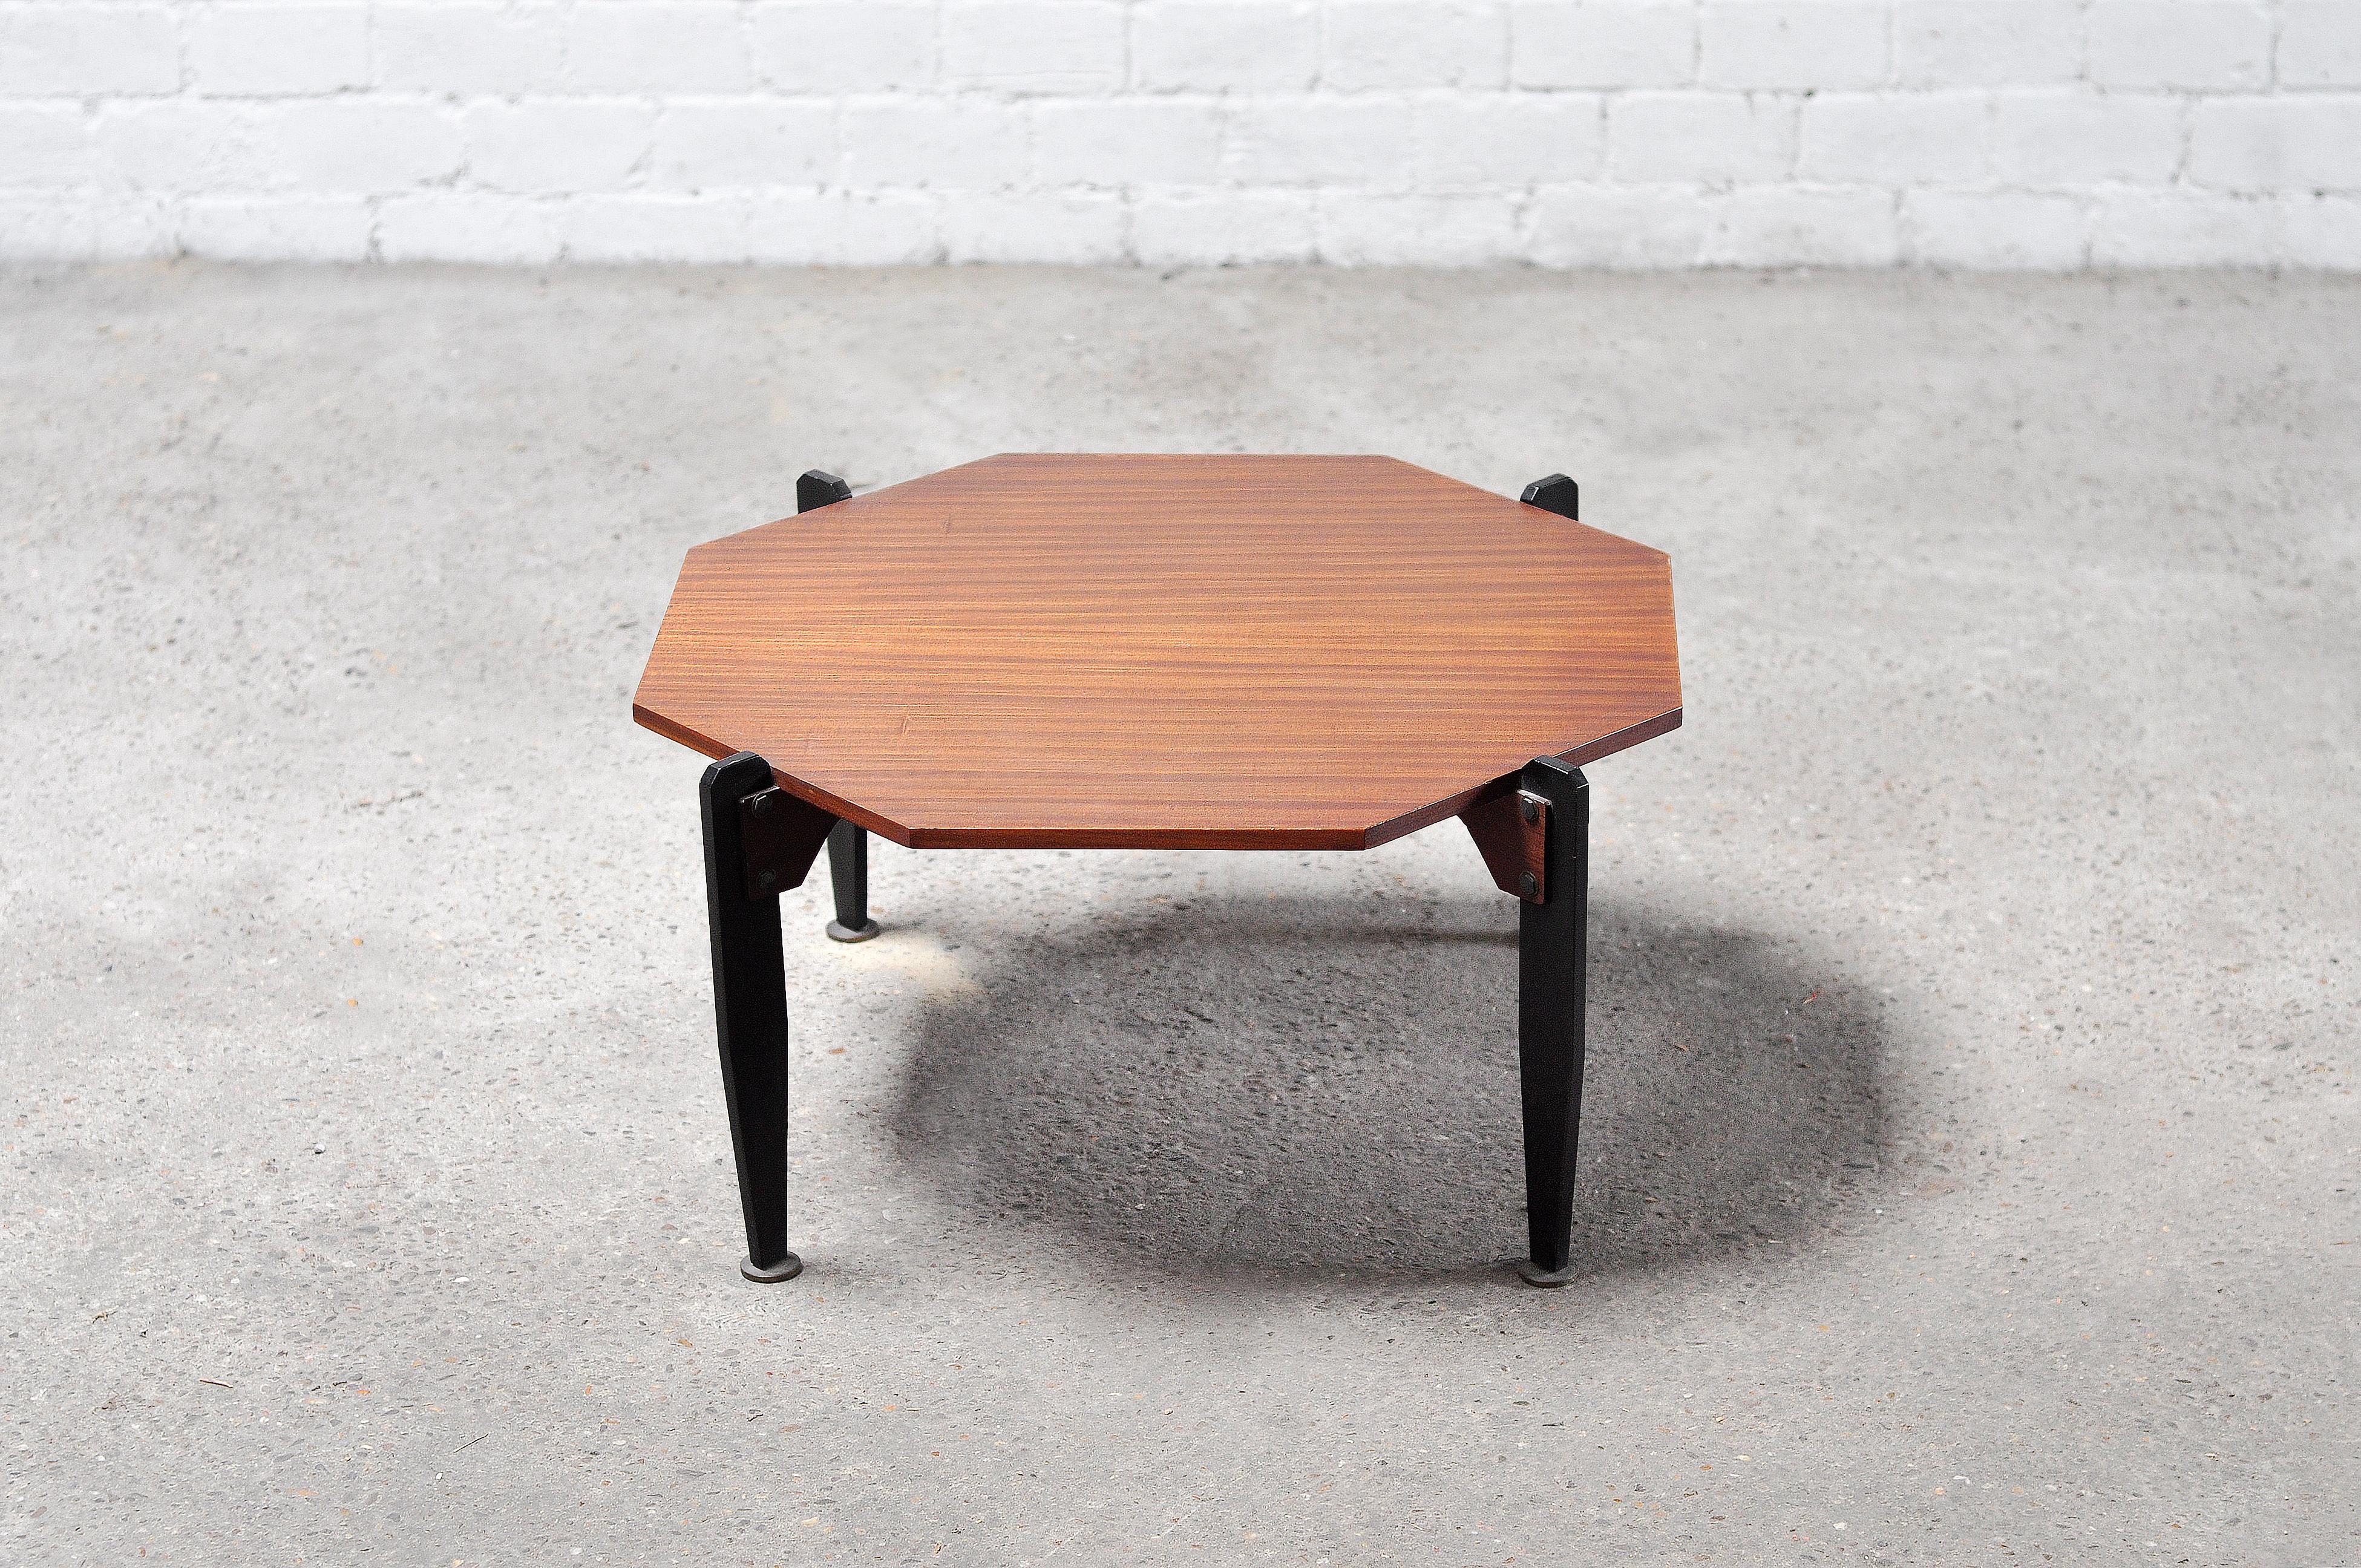 Italian Modernist Coffee Table in Teak And Lacquered Metal, 1950s For Sale 1